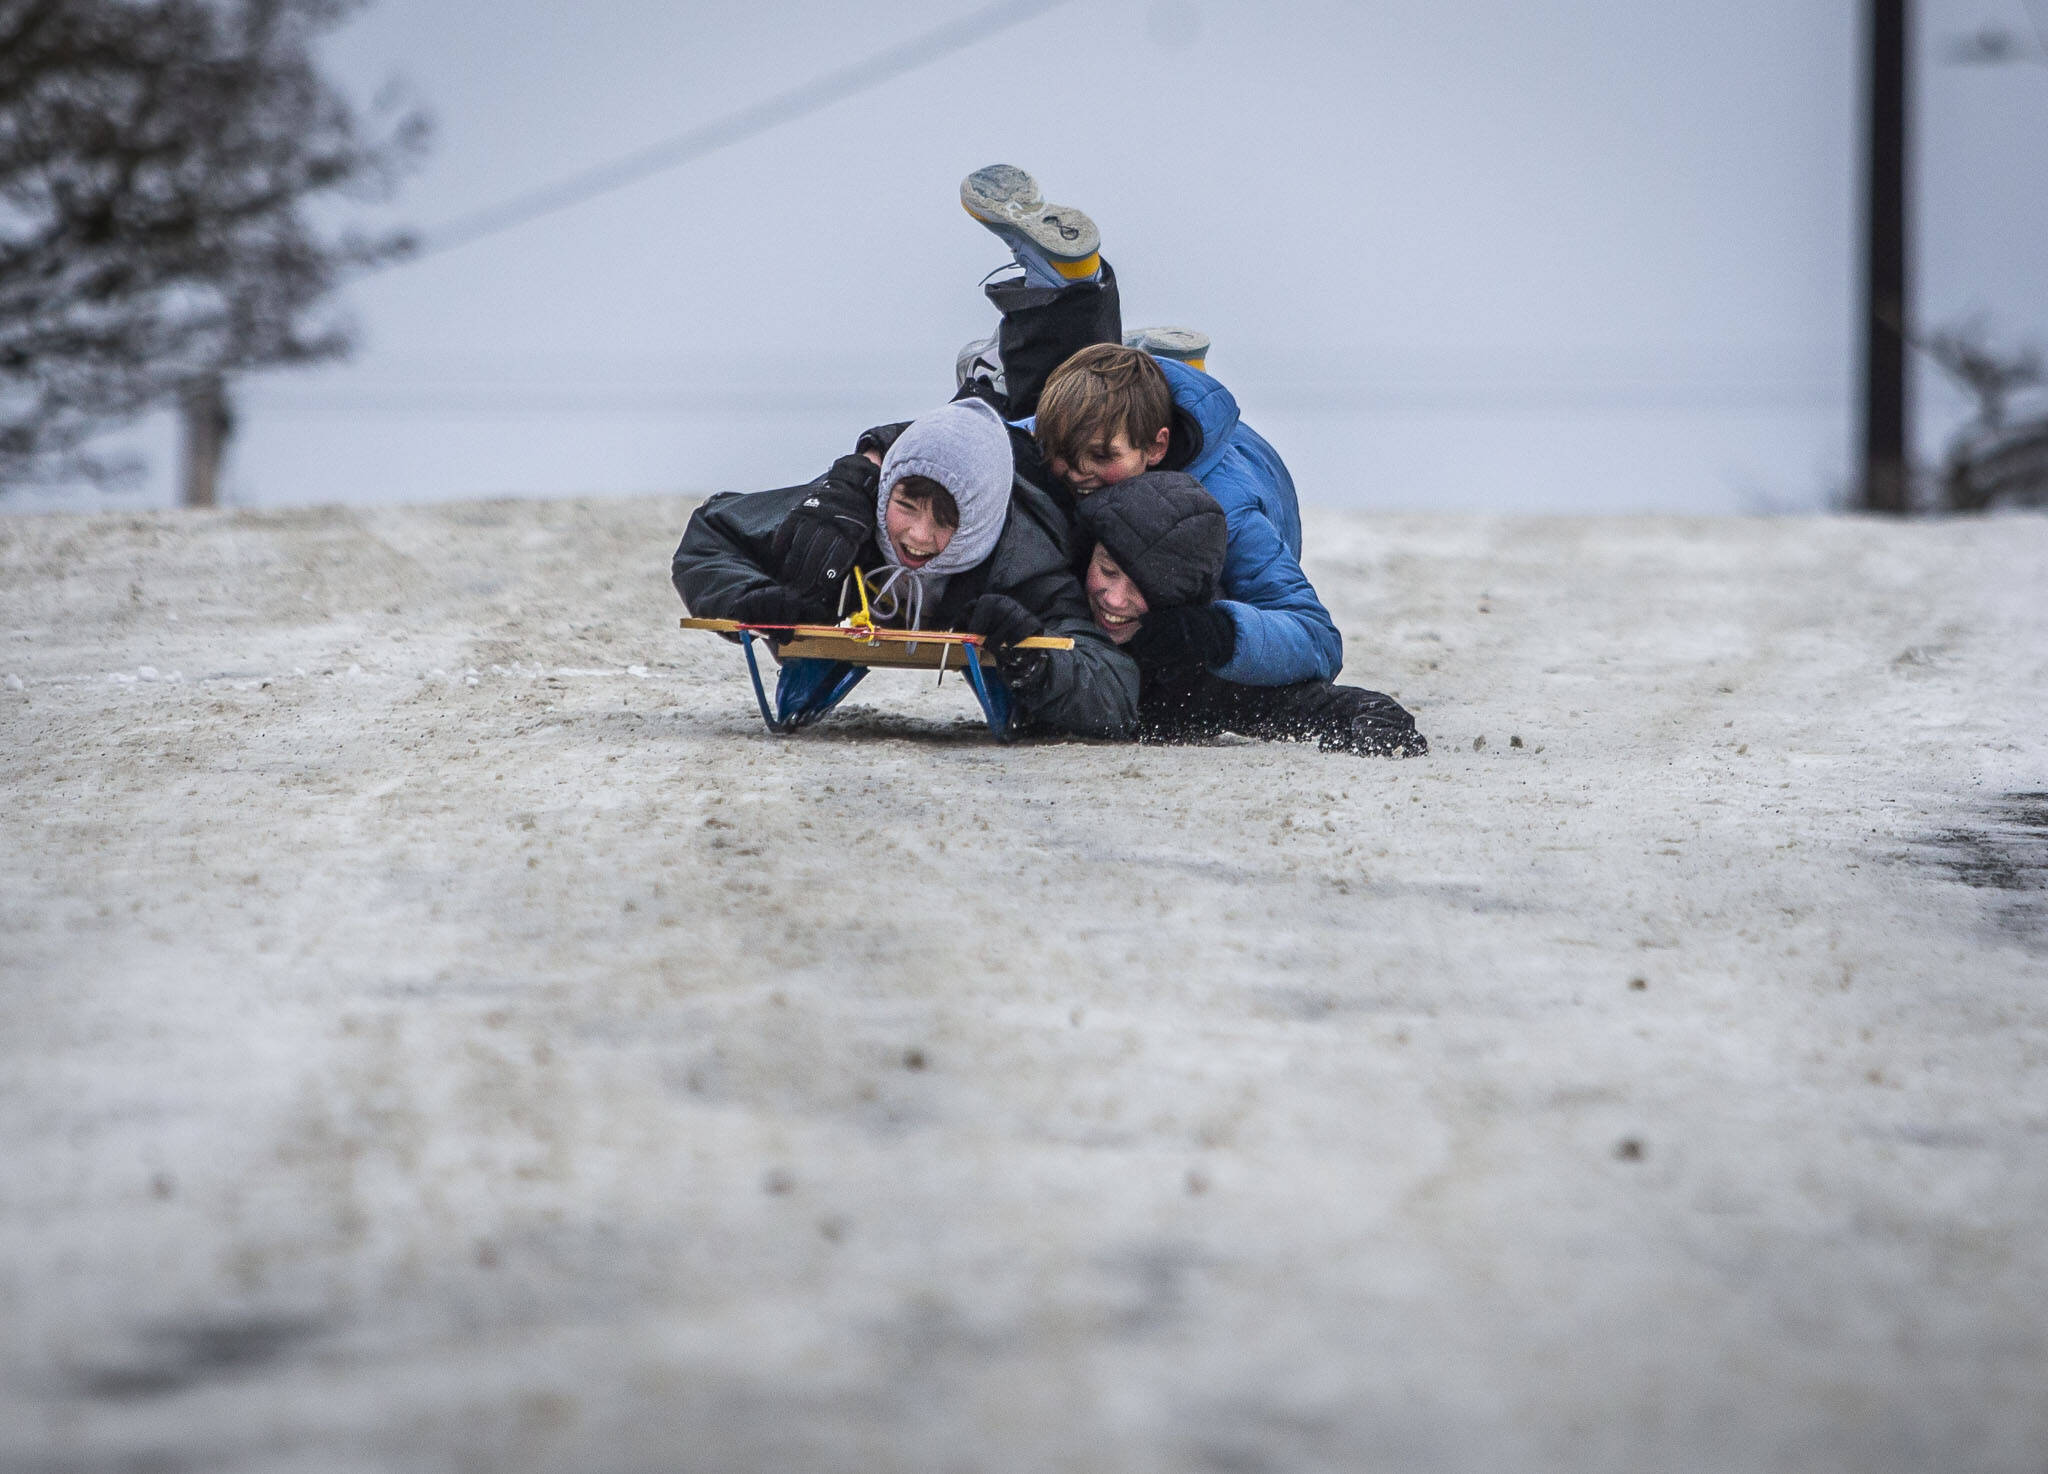 Ray Hendry, Corbyn Scervik and Same Lane try to all fit on one sled as they navigate their way down the hill on Thursday, Dec. 22, 2022 in Everett, Washington. (Olivia Vanni / The Herald)